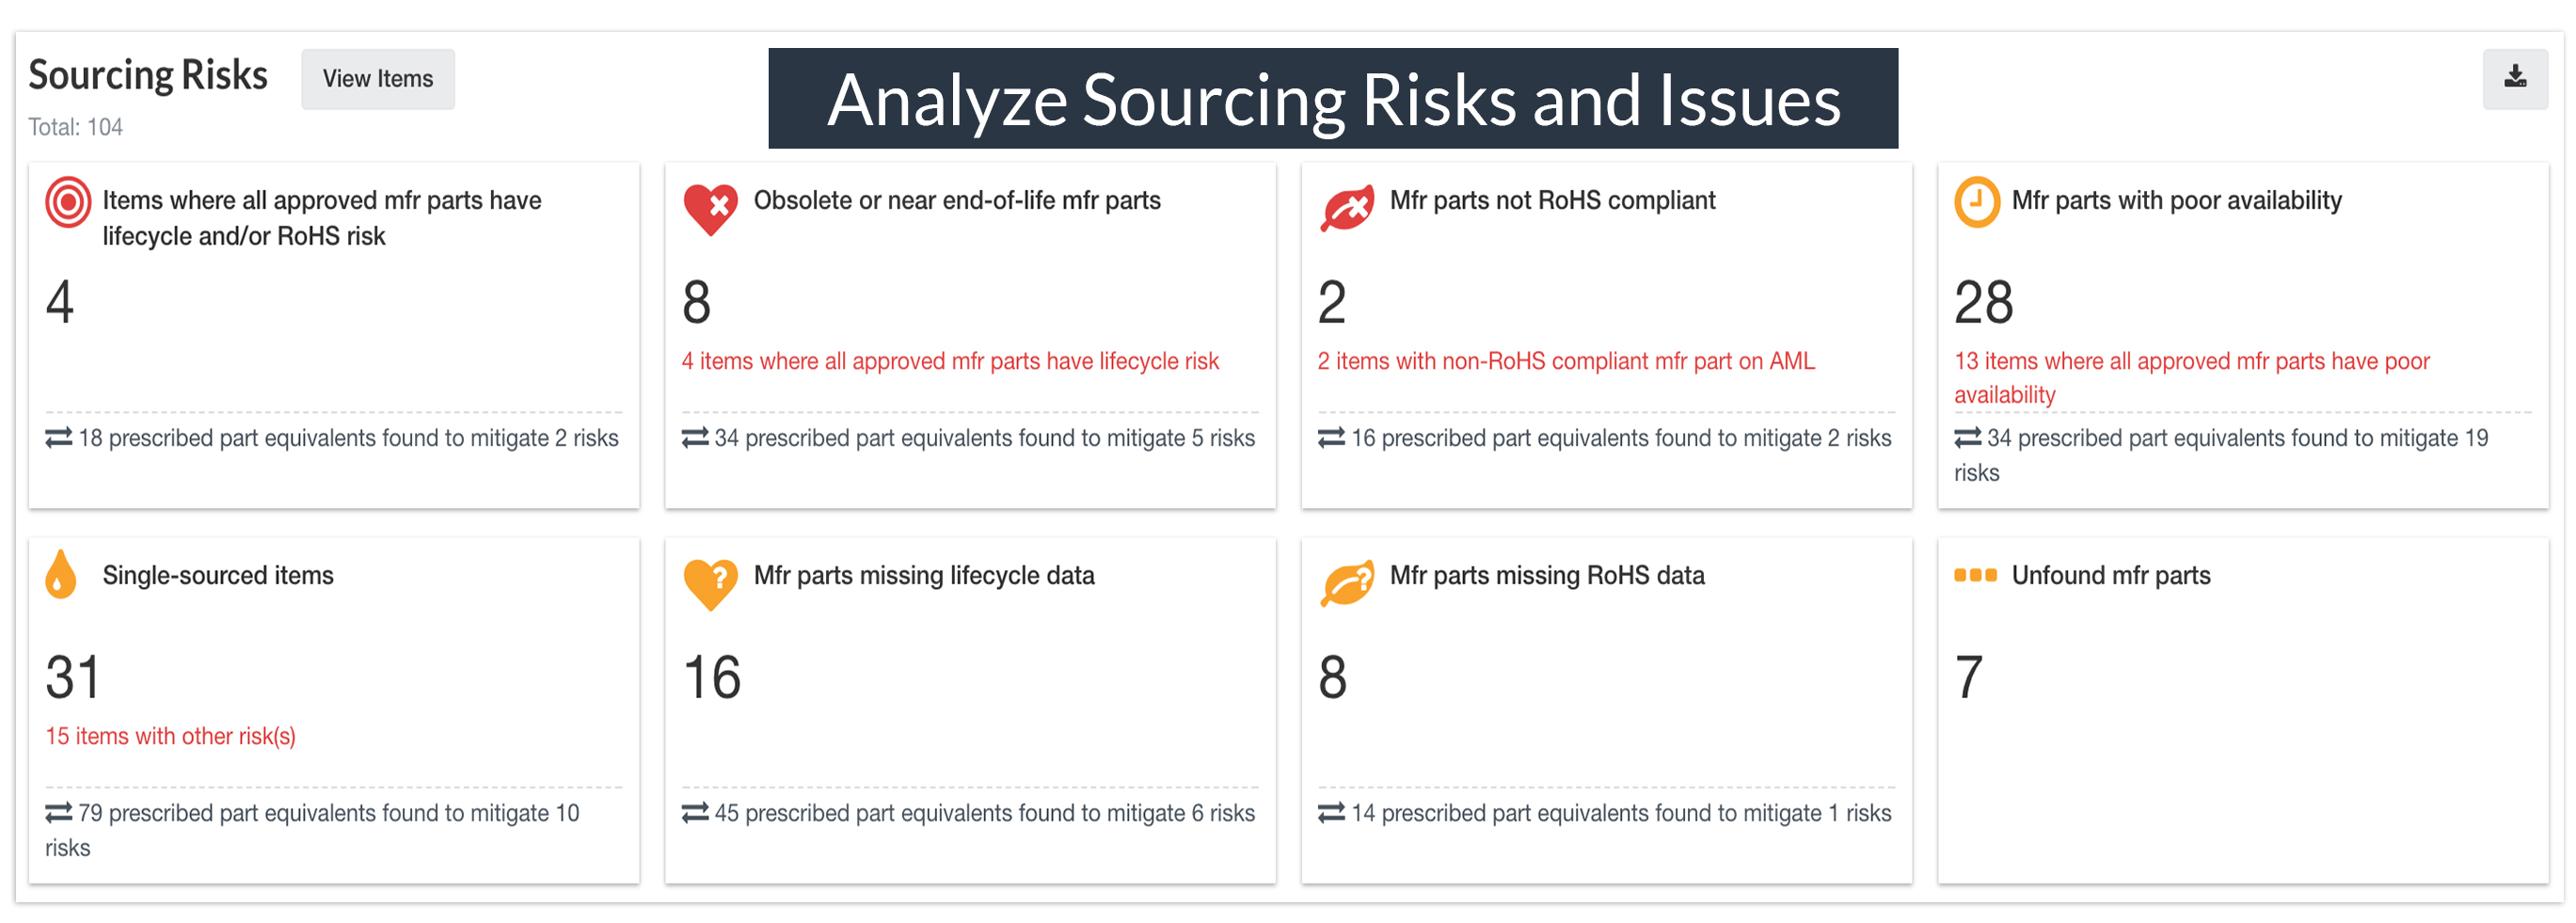 Analyze Sourcing Risks and Issues